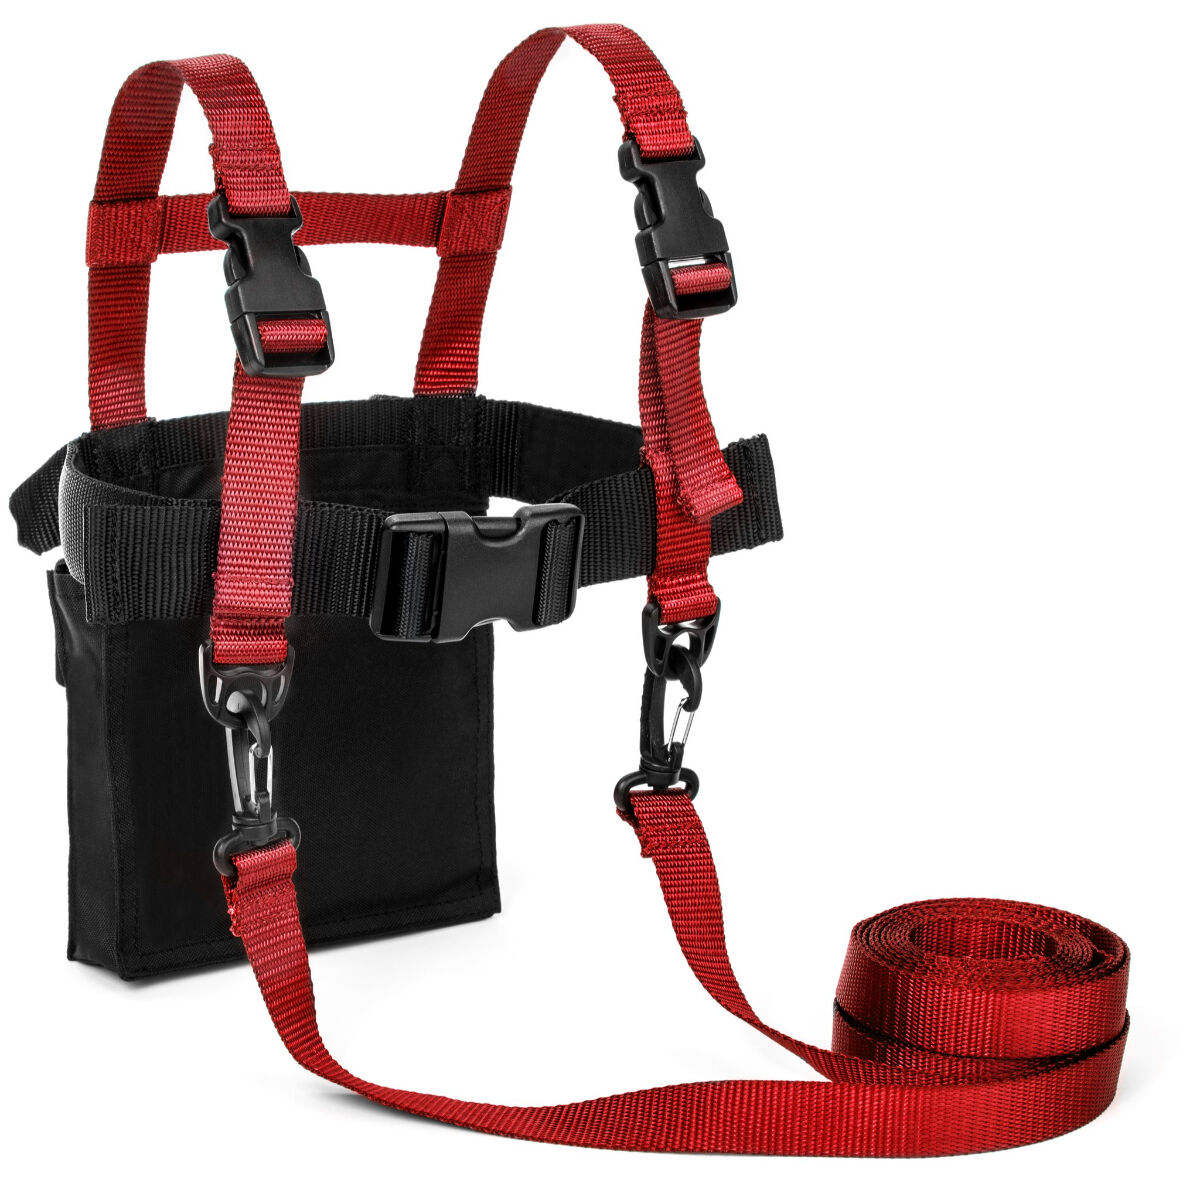 Red & Backpack Lucky Bums Kids Ski Harness w/ Grip N' Guide Handle 2 Leashes 